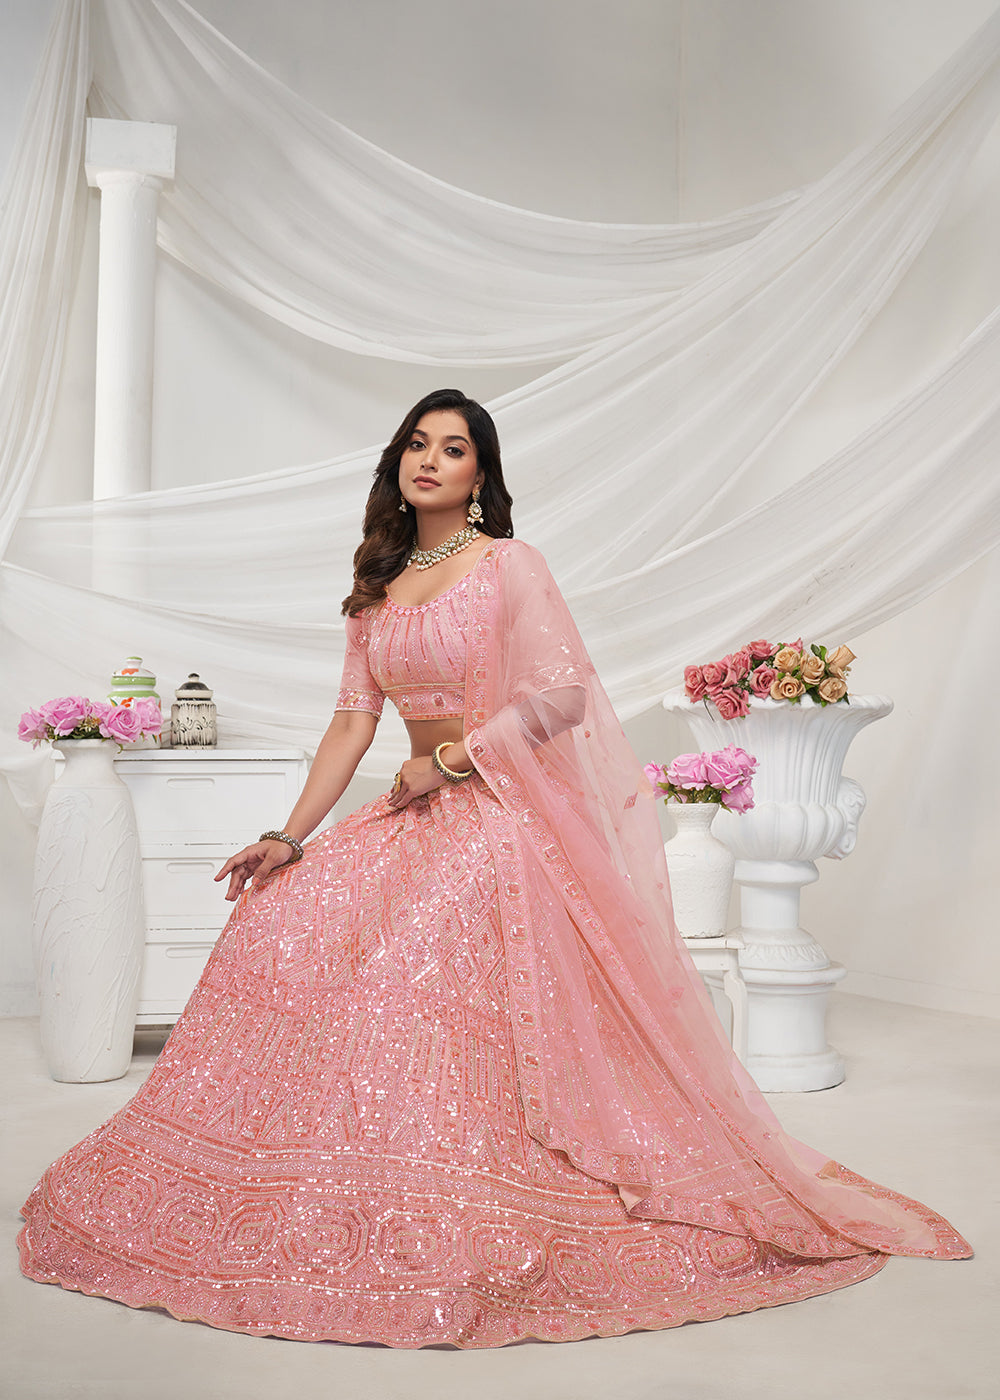 Buy Now Pearled Peach Heavy Embroidered Bridal Lehenga Choli Online in USA, UK, Canada & Worldwide at Empress Clothing.